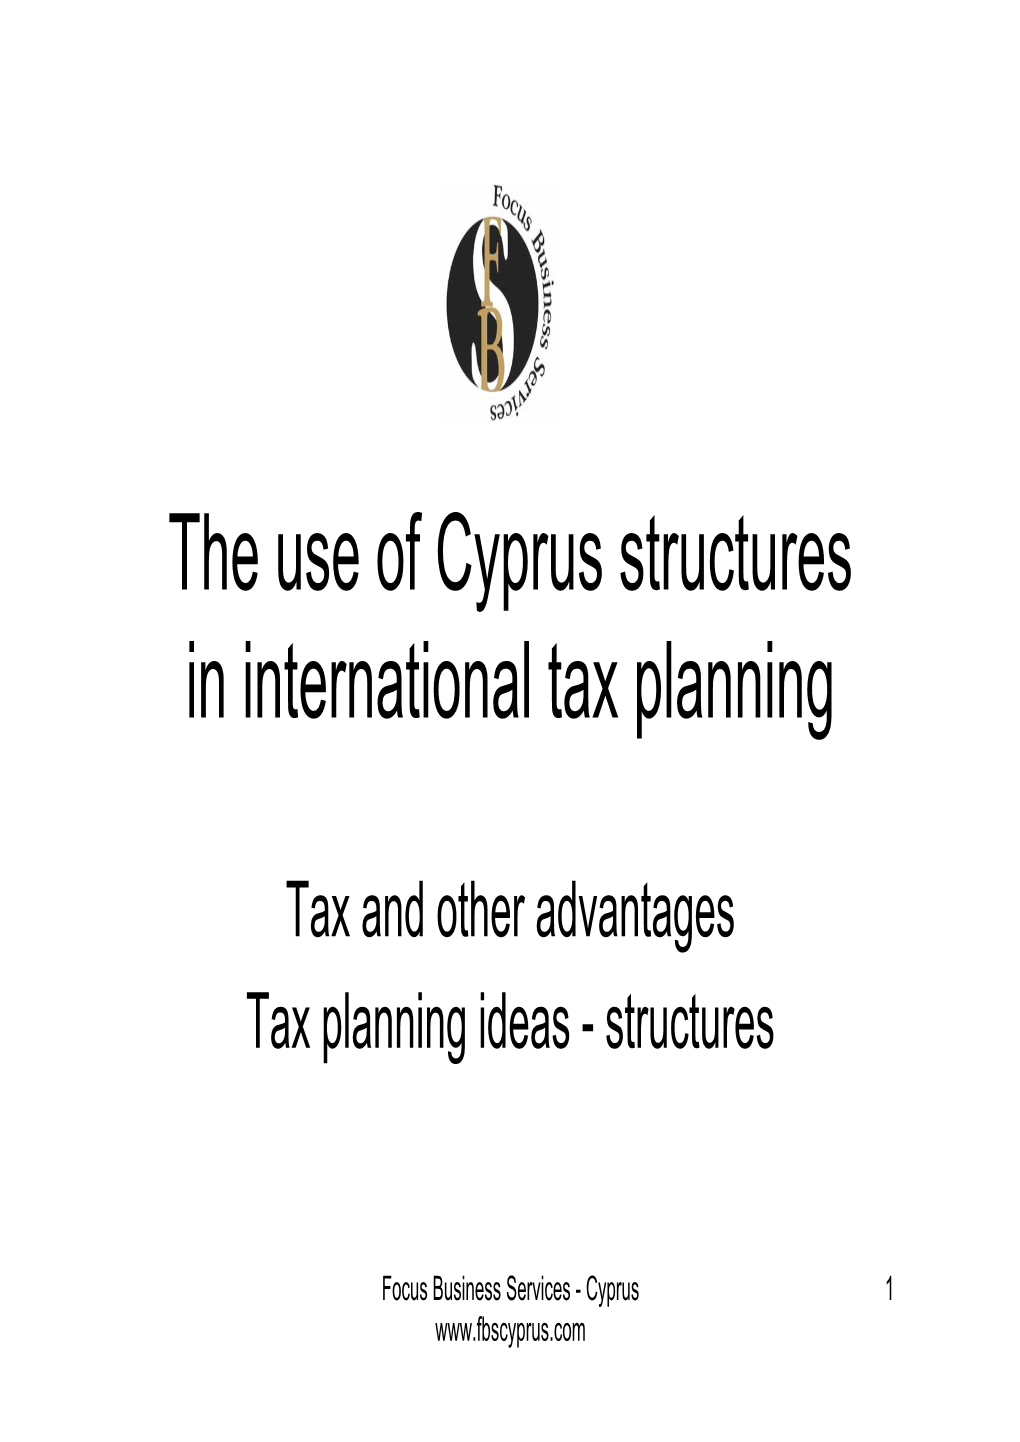 The Use of Cyprus Structures in International Tax Planning